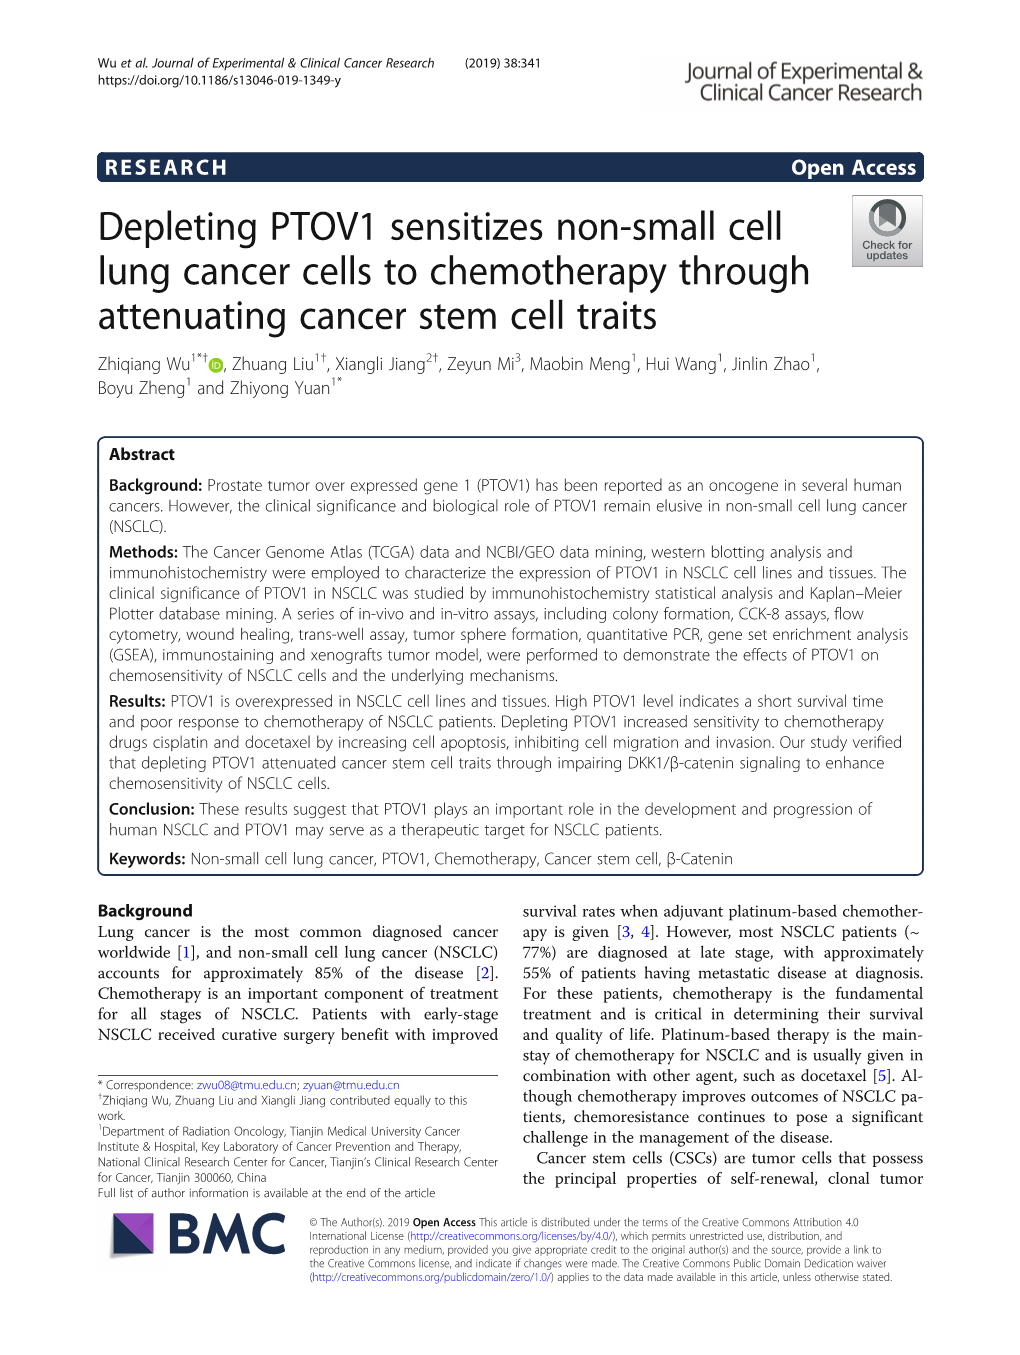 Depleting PTOV1 Sensitizes Non-Small Cell Lung Cancer Cells to Chemotherapy Through Attenuating Cancer Stem Cell Traits